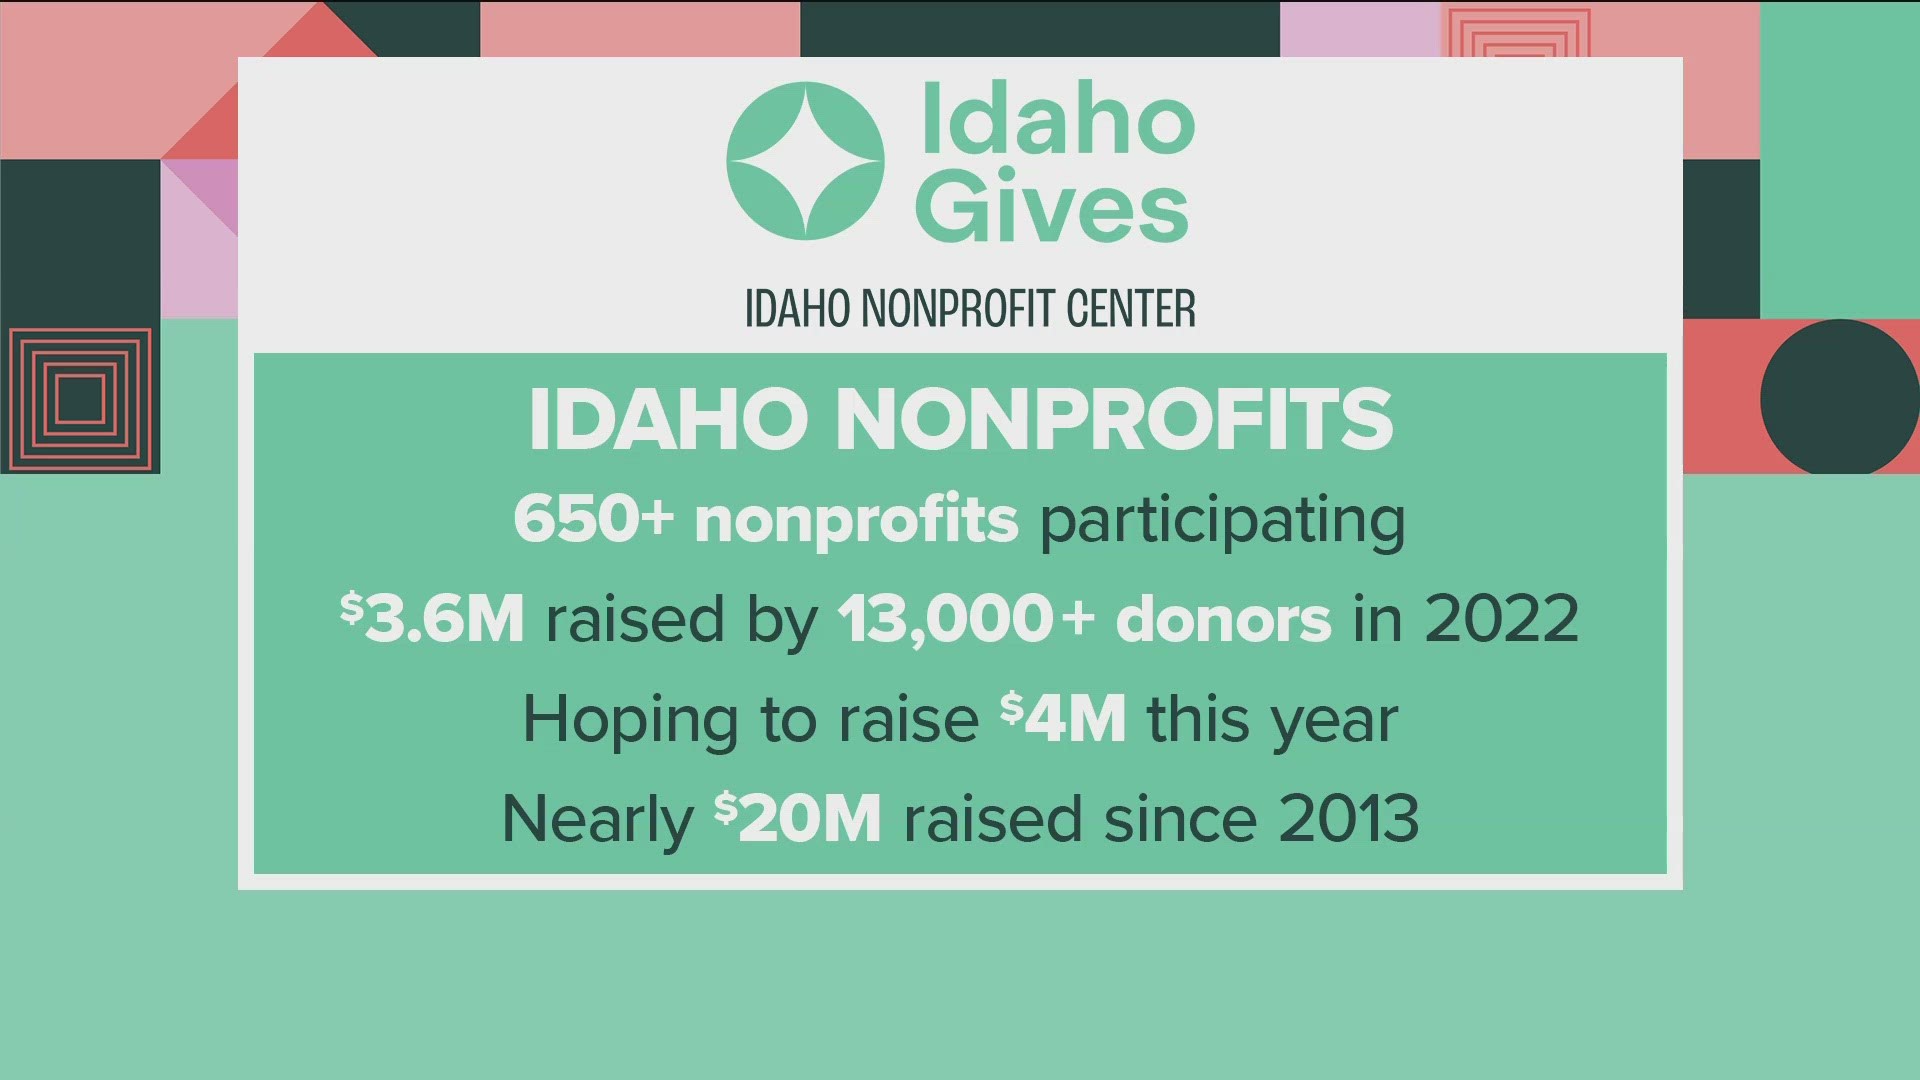 Idaho's largest online giving event has raised nearly $20M for Idaho nonprofits. One nonprofit, Interlink Volunteer Caregivers, provides transportation for seniors.